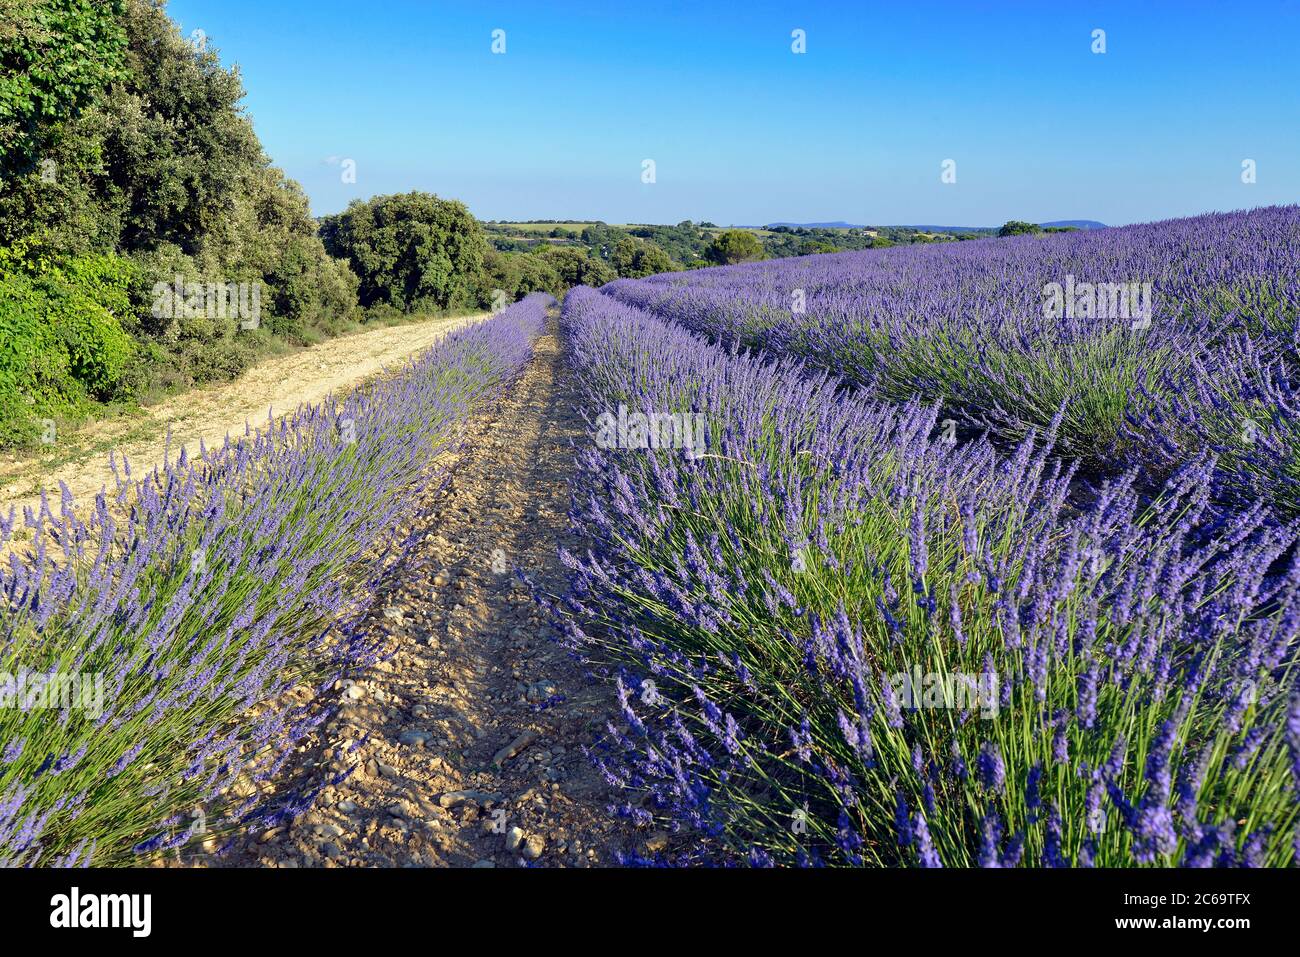 Lavender field on the famous Valensole plateau, a commune in the Alpes-de-Haute-Provence department in southeastern France Stock Photo